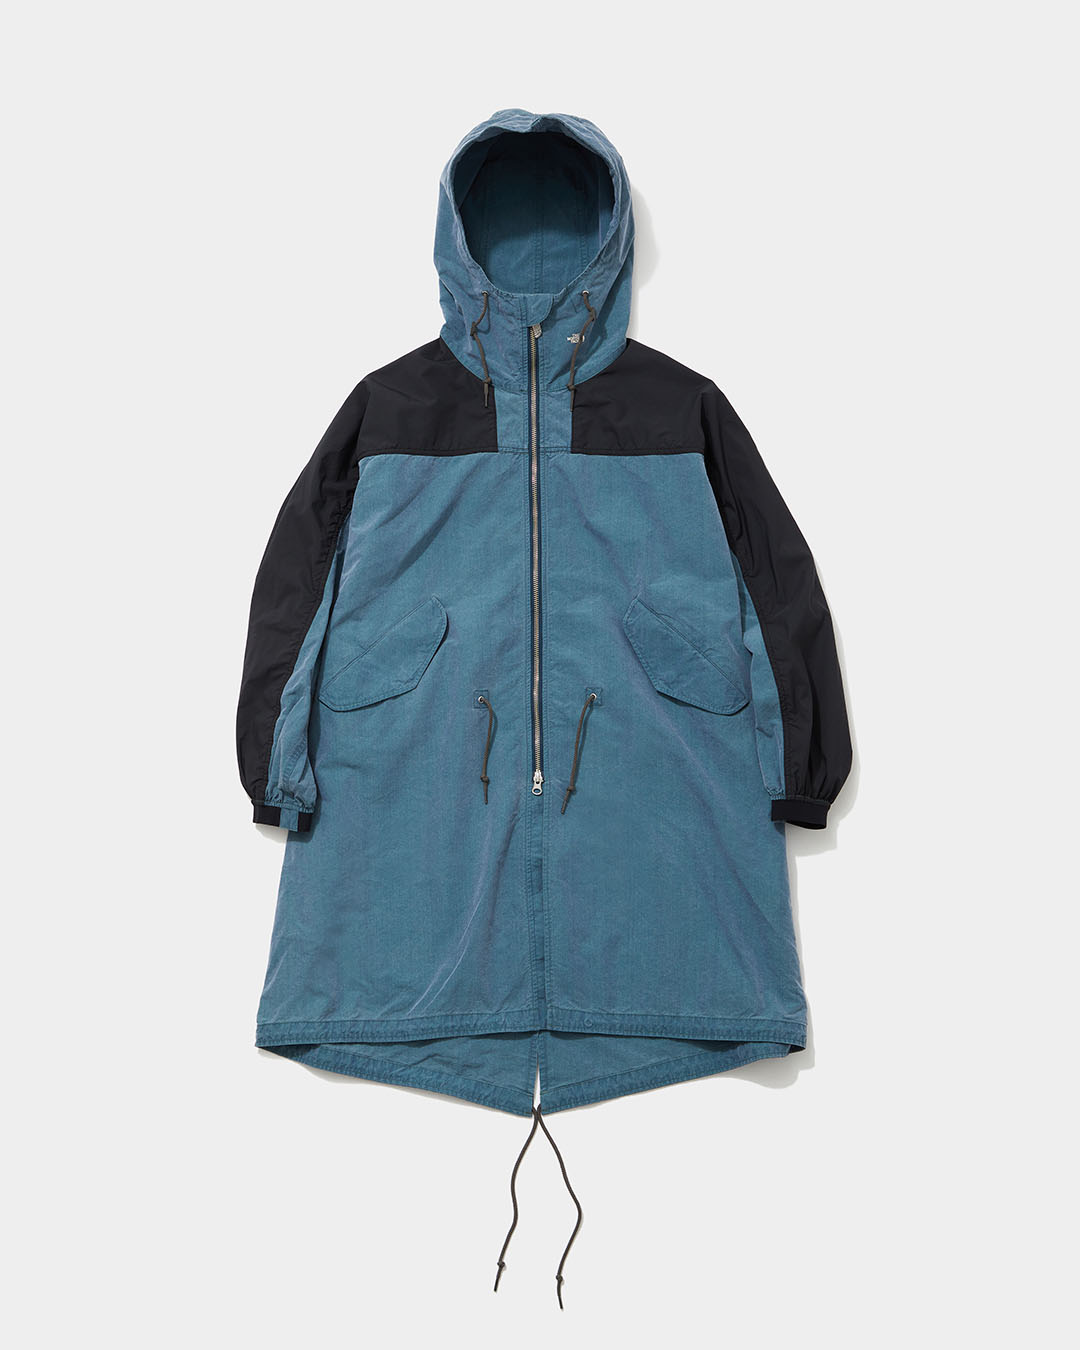 nanamica / THE NORTH FACE PURPLE LABEL / Featured Product vol.11